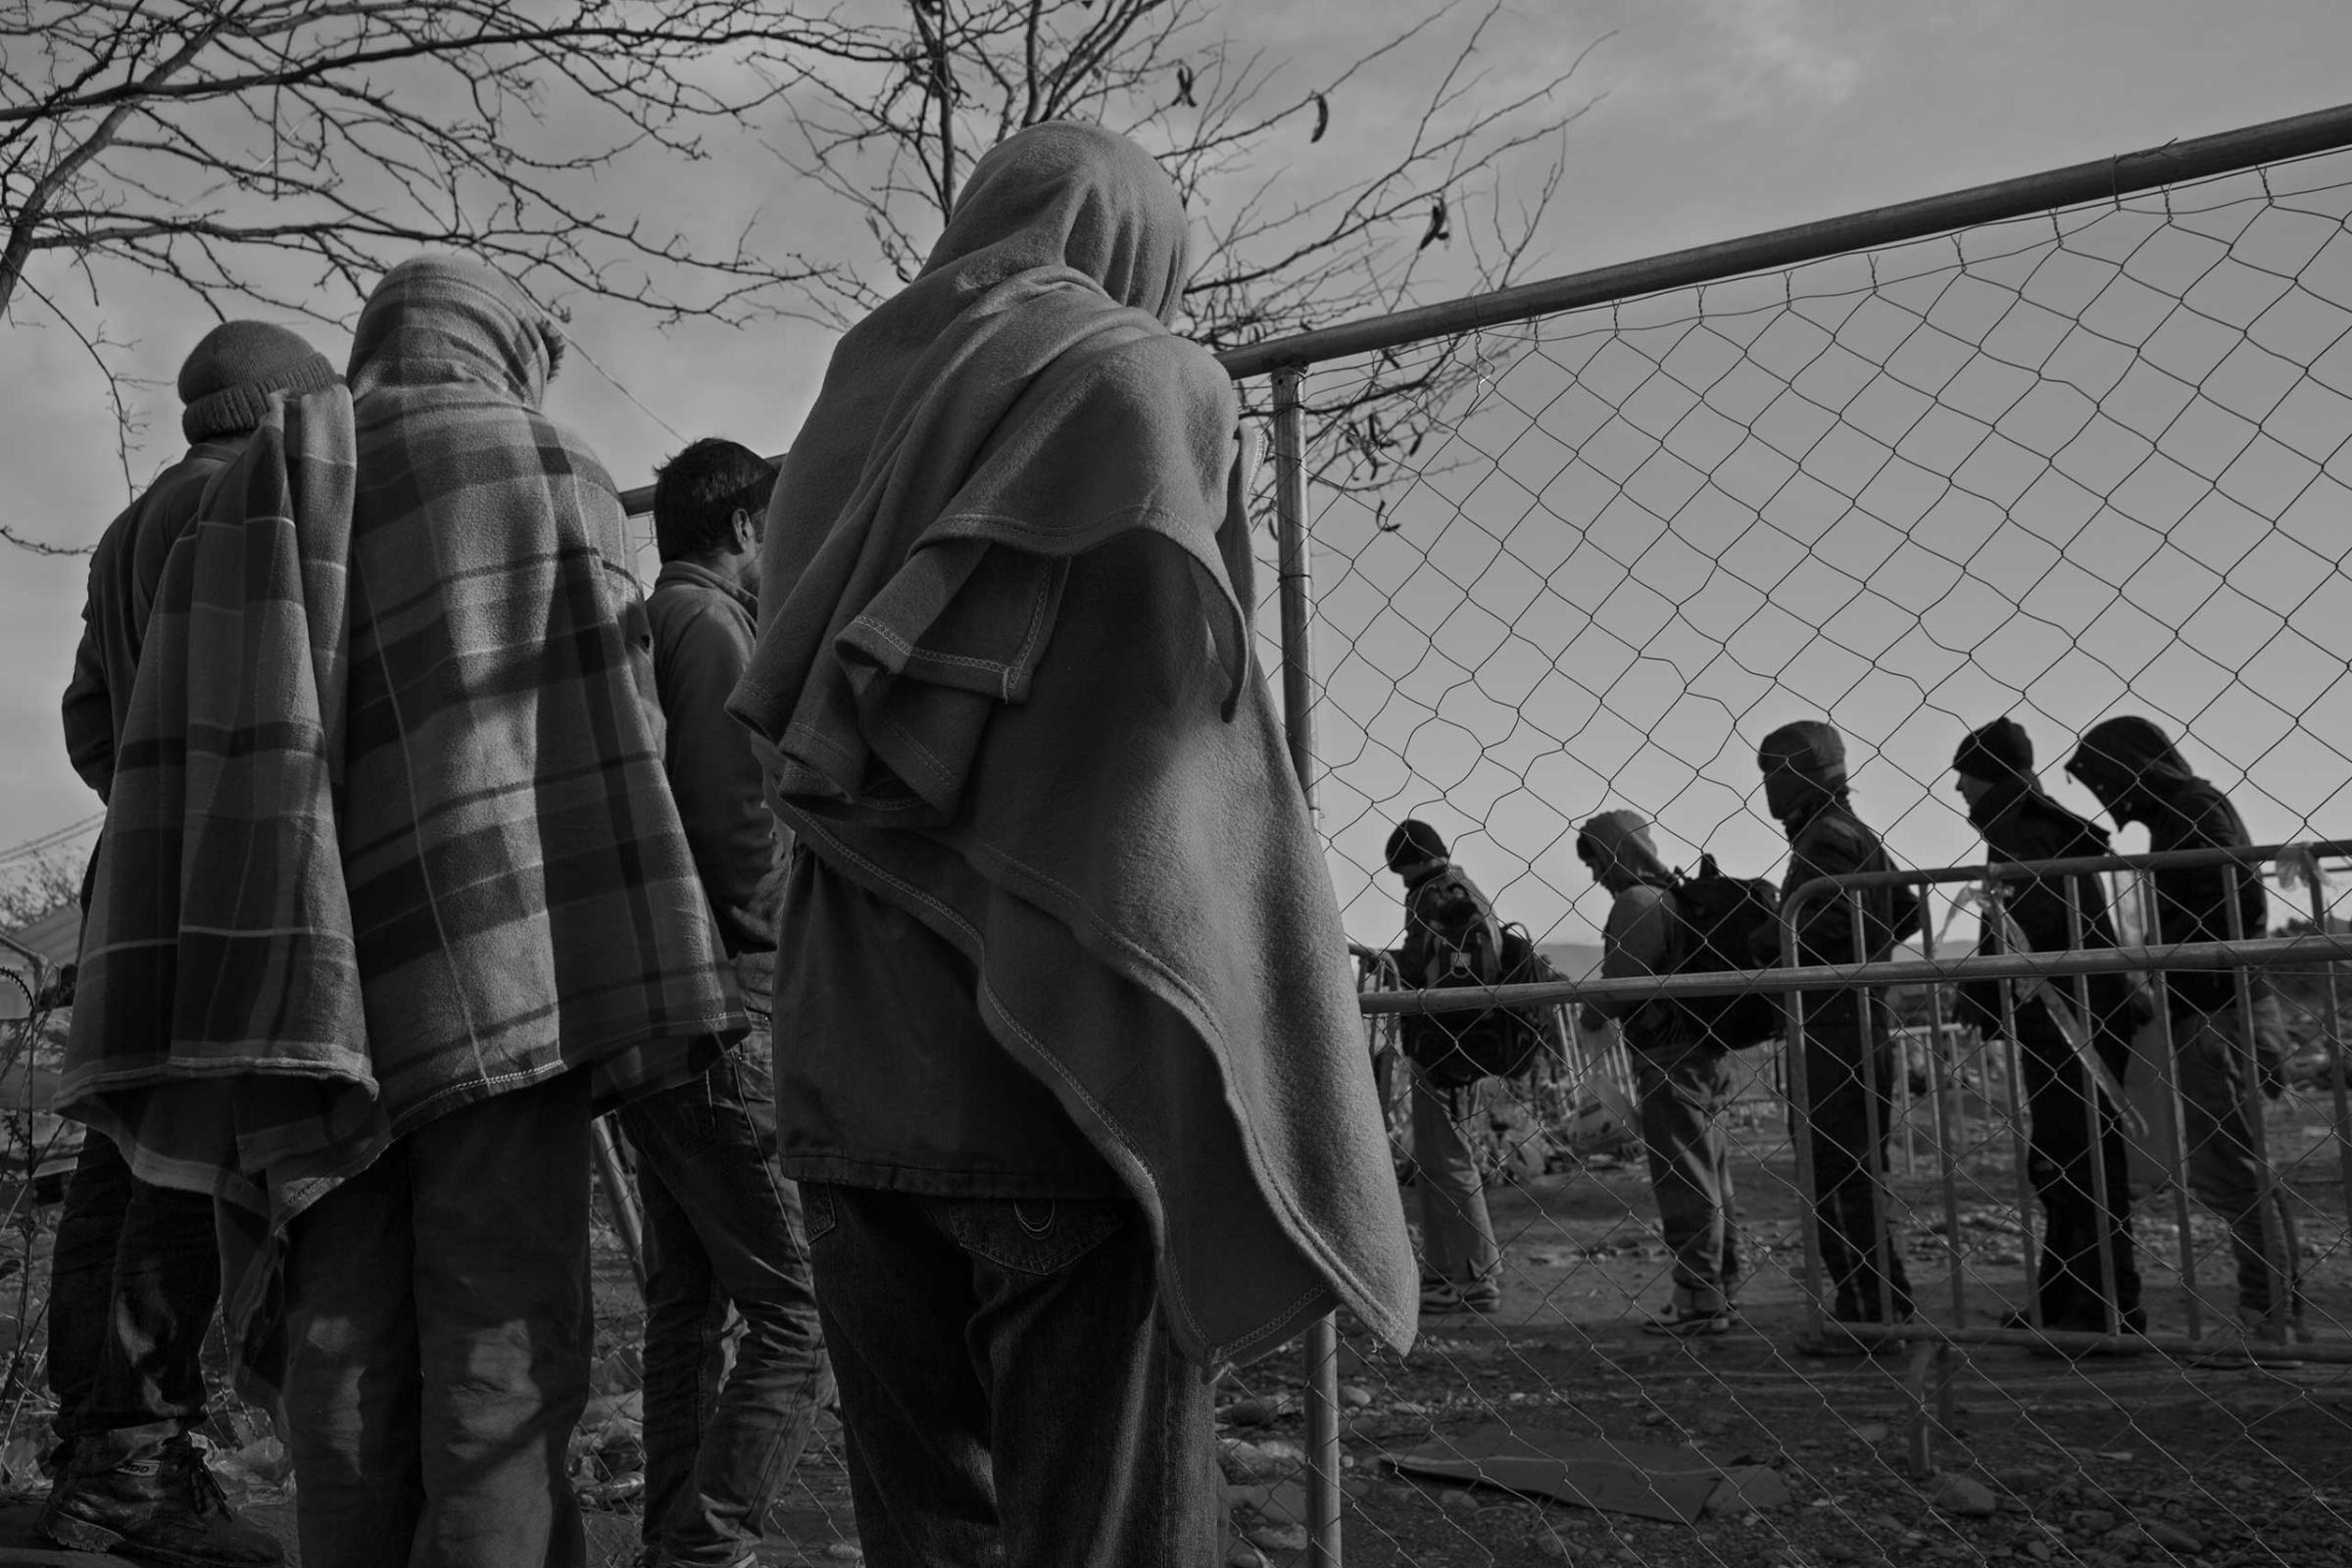 Refugees and migrants from Morocco, Iran, Pakistan, Bangladesh, and Somalia, who are not permitted to cross from Greece into Macedonia, watch as those from war-torn countries of Afghanistan, Iraq and Syria, pass into Macedonia.